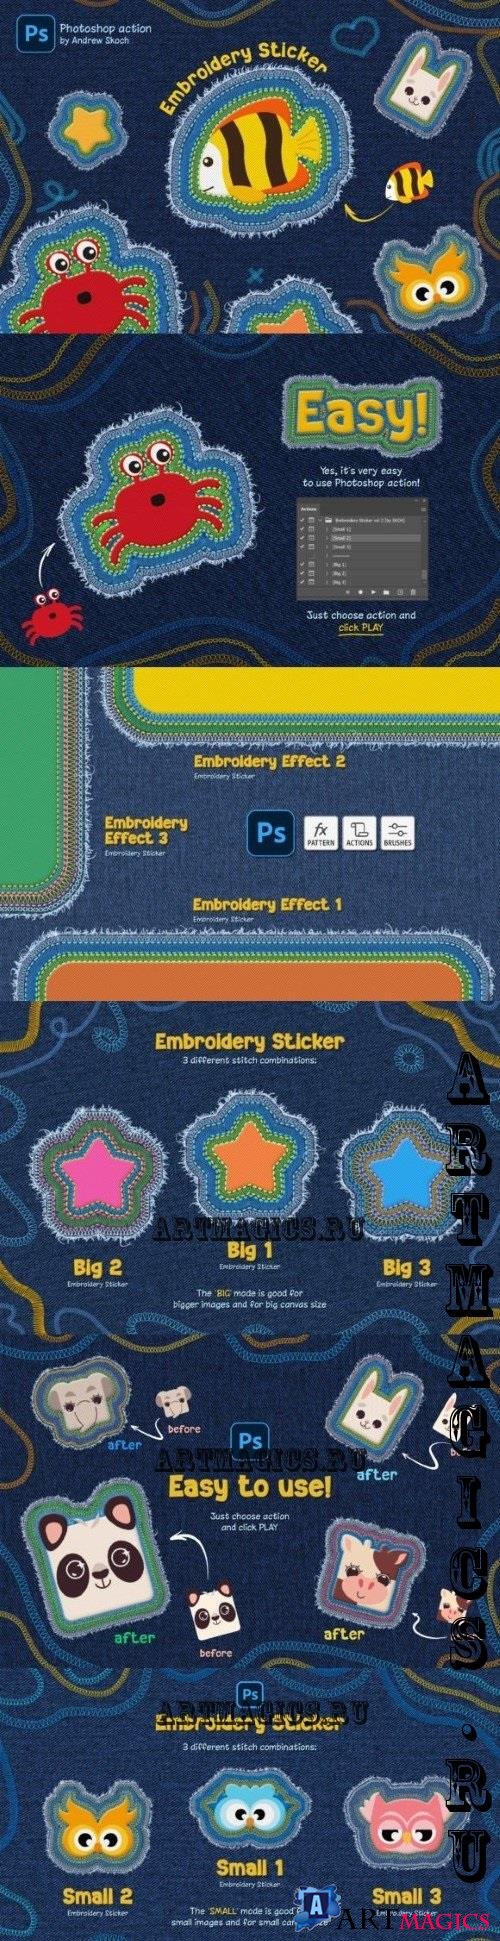 Embroidery Sticker Photoshop Action - 92526074